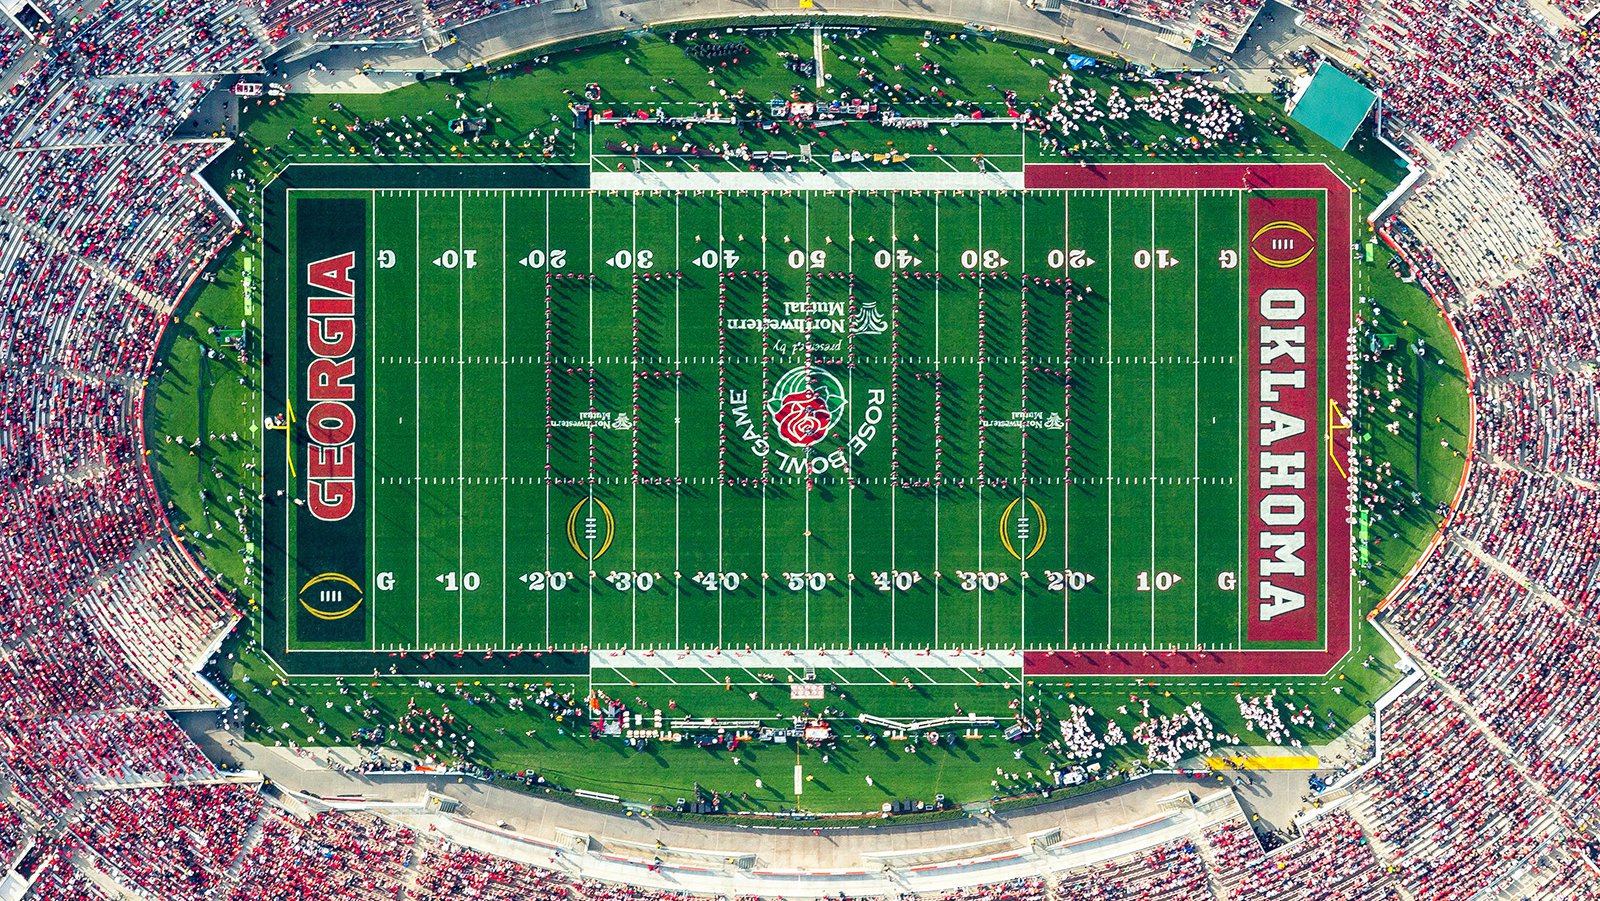 The University of Georgia Bulldogs marching band is proudly spelling out 'GEORGIA' in the iconic Rose Bowl Stadium, as thousands of dedicated and passionate fans cheer them on during the 2018 Rose Bowl Game in Pasadena, California.